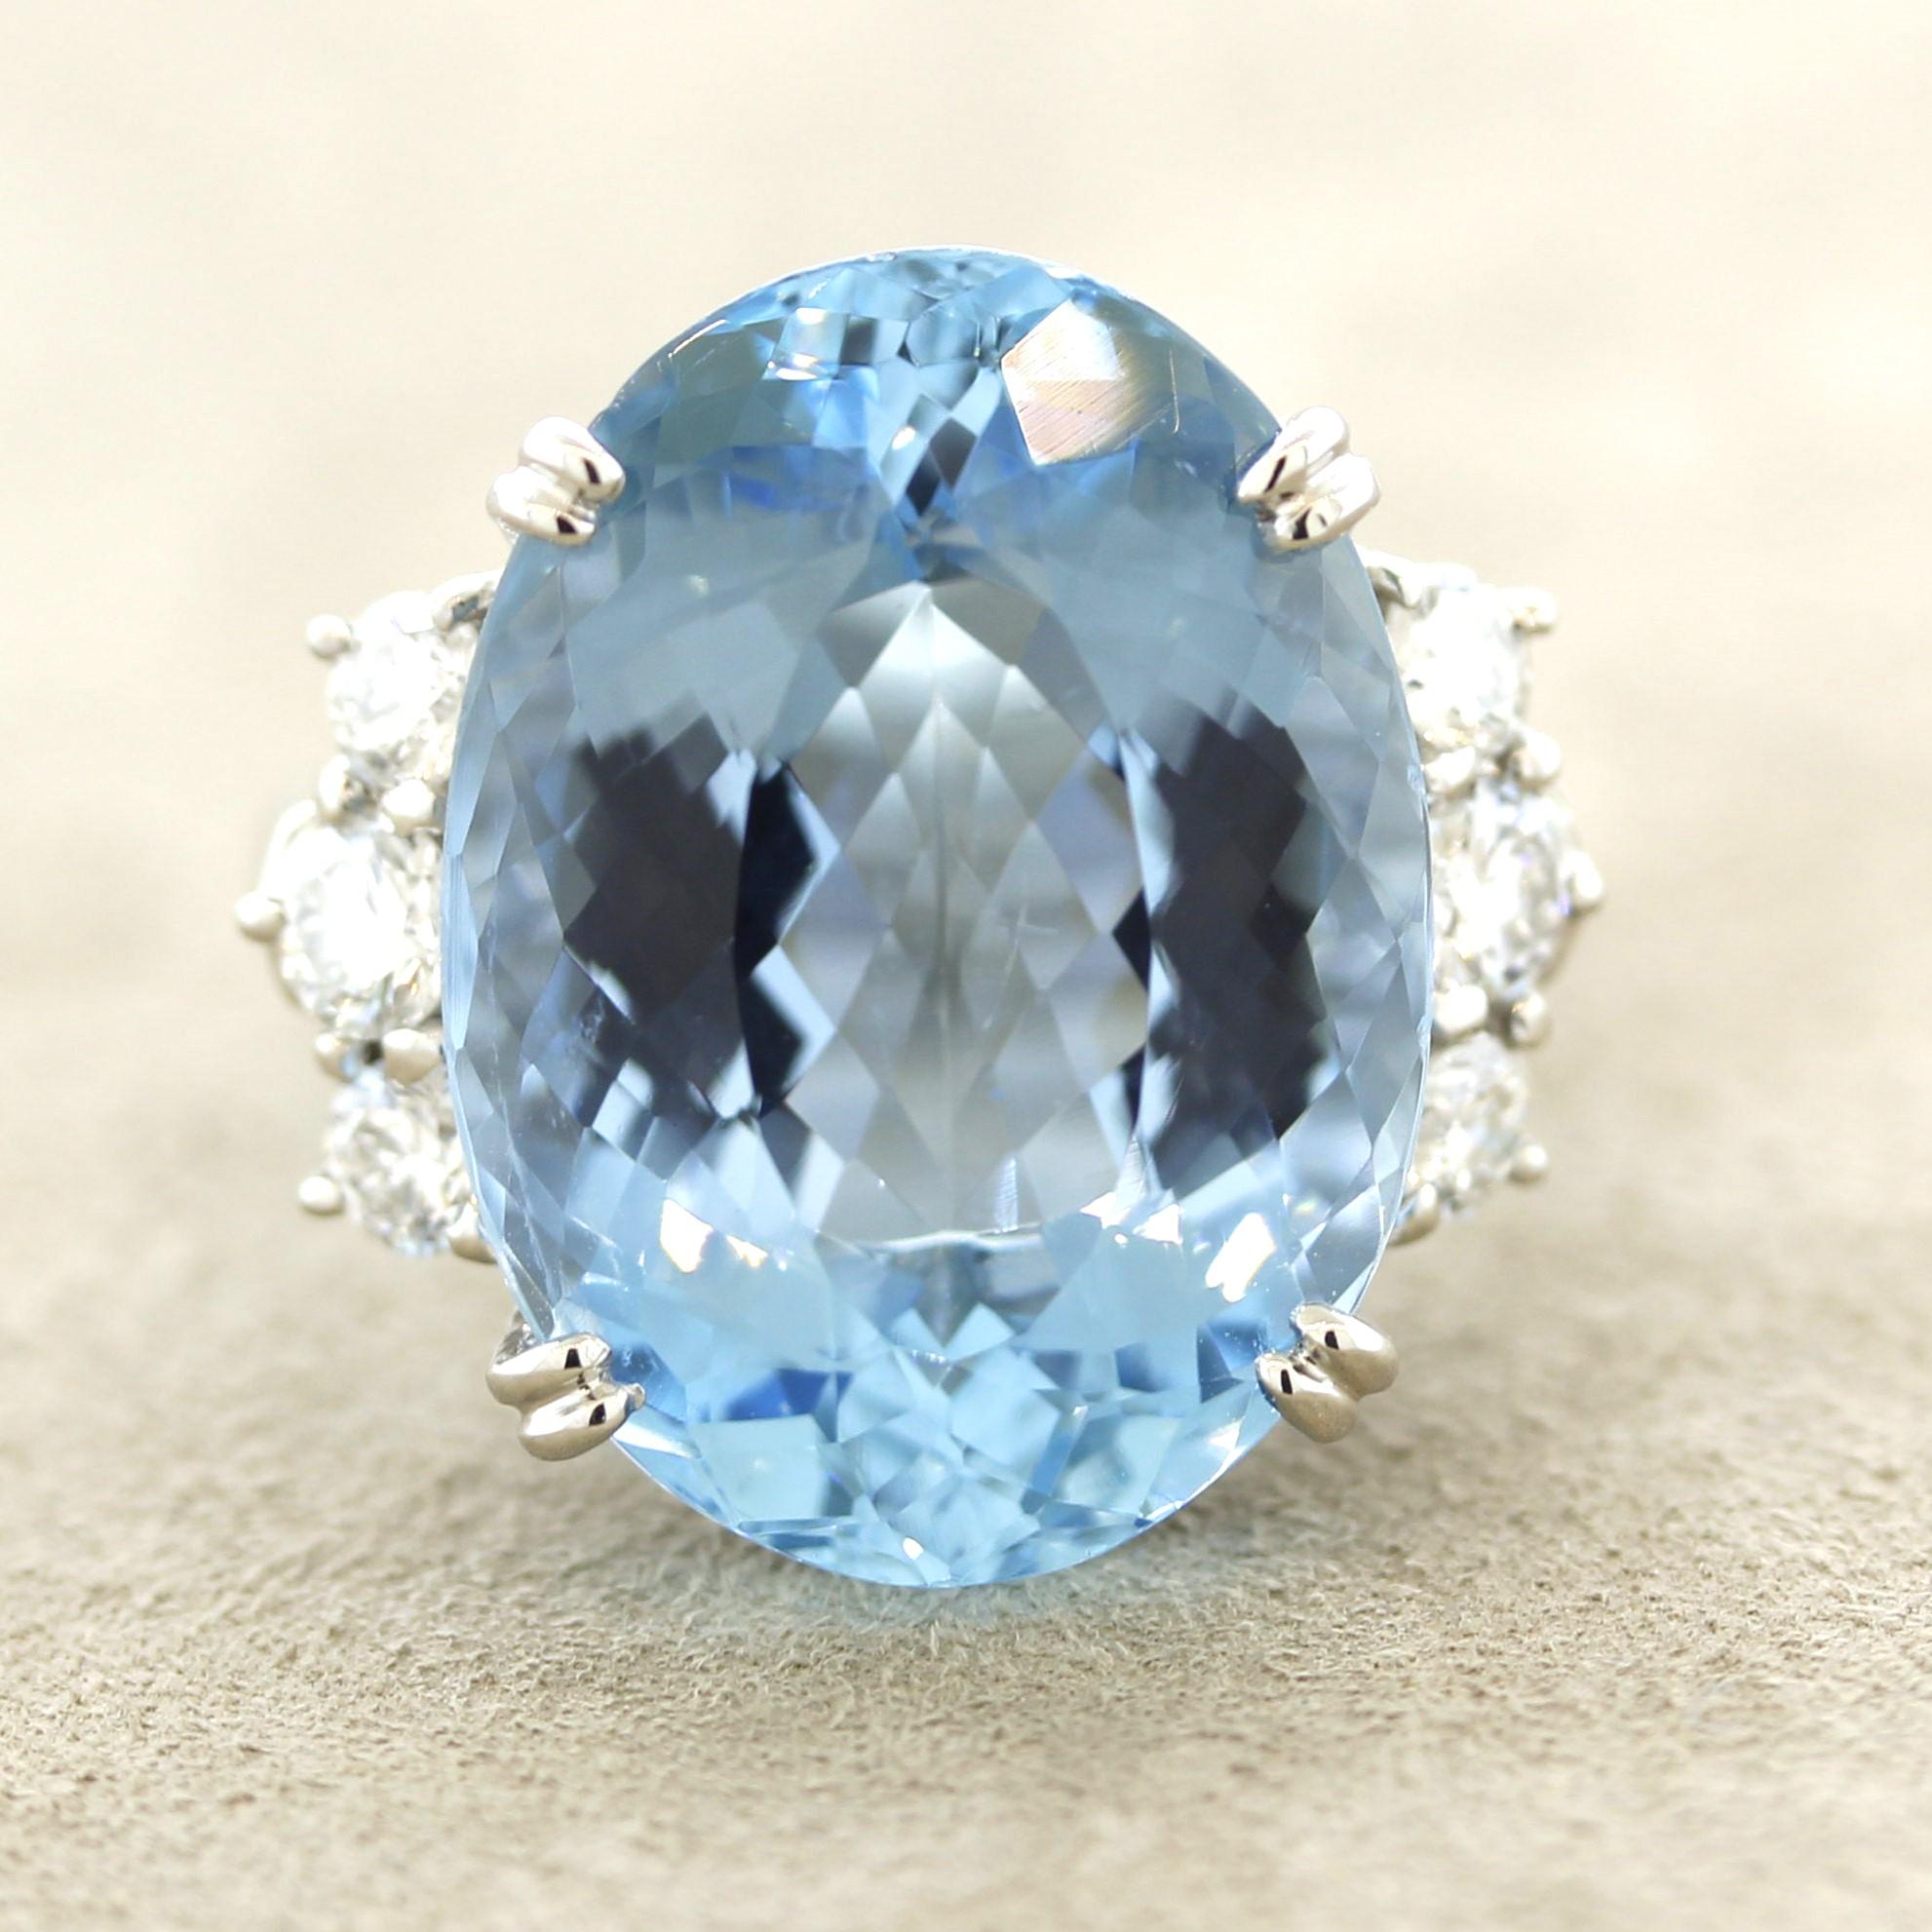 A large, impressive and fine aquamarine takes center stage! It weighs 16.45 carats and has a rich sea-blue color which only the finest aquamarines have. Many people would consider this “Santa Maria” blue color referring to the finest find of